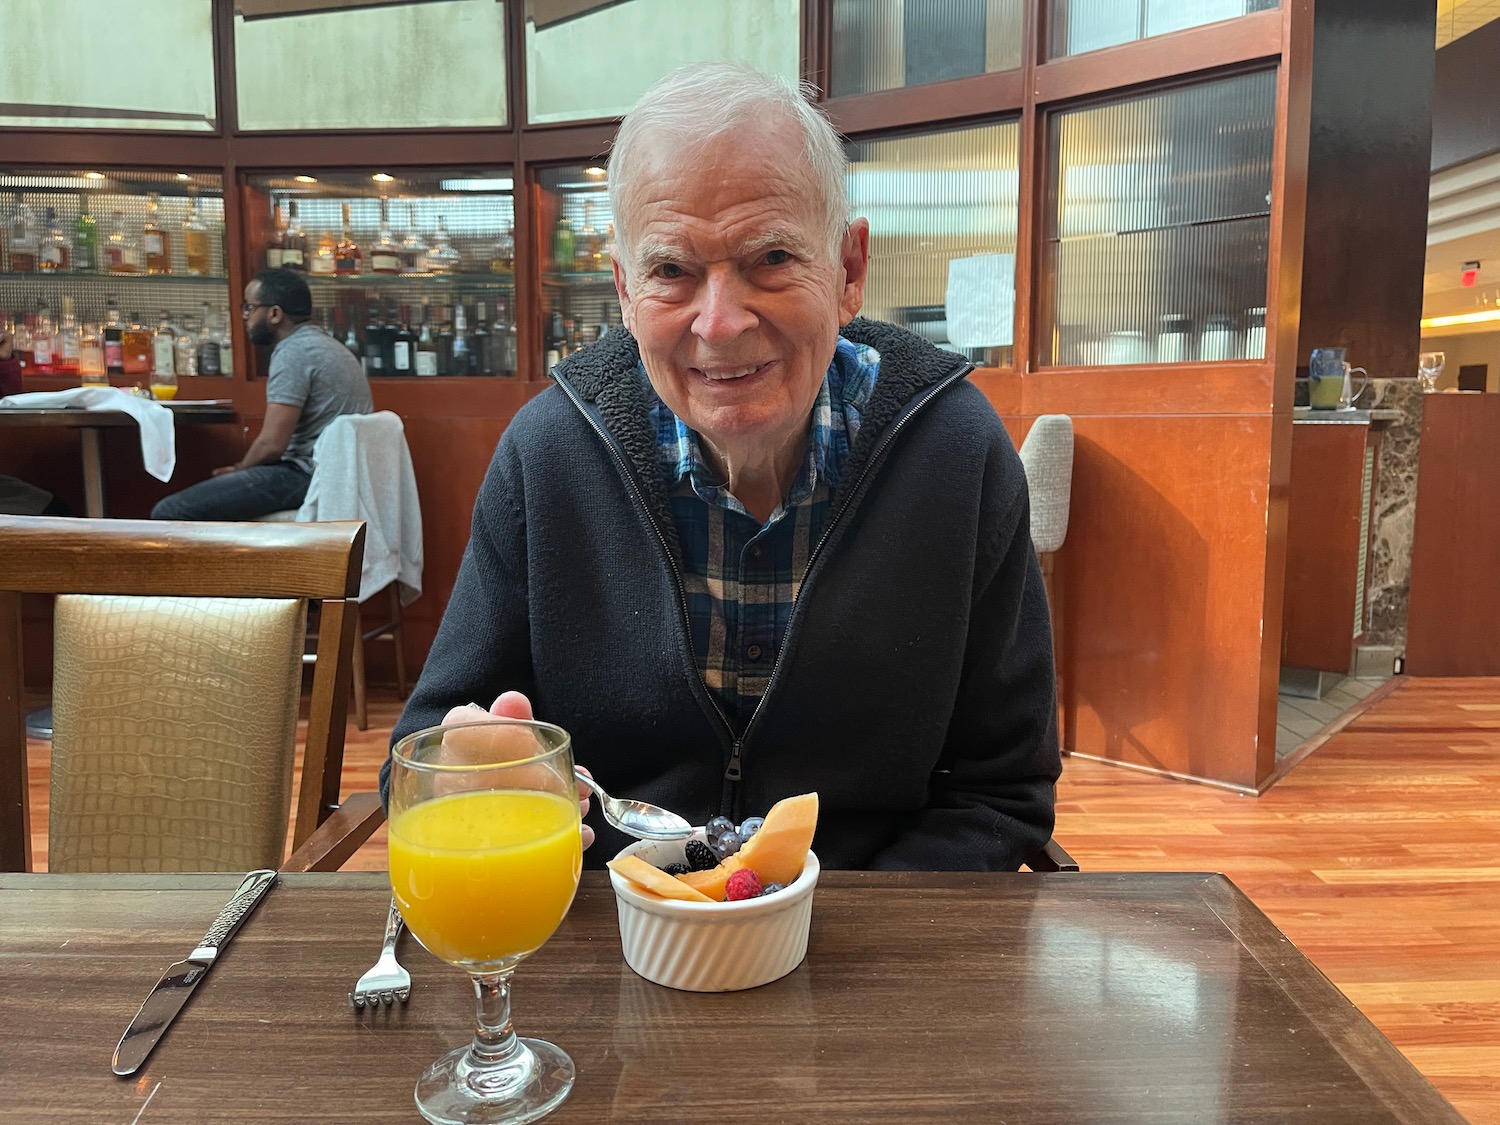 an old man sitting at a table with a bowl of fruit and a glass of orange juice